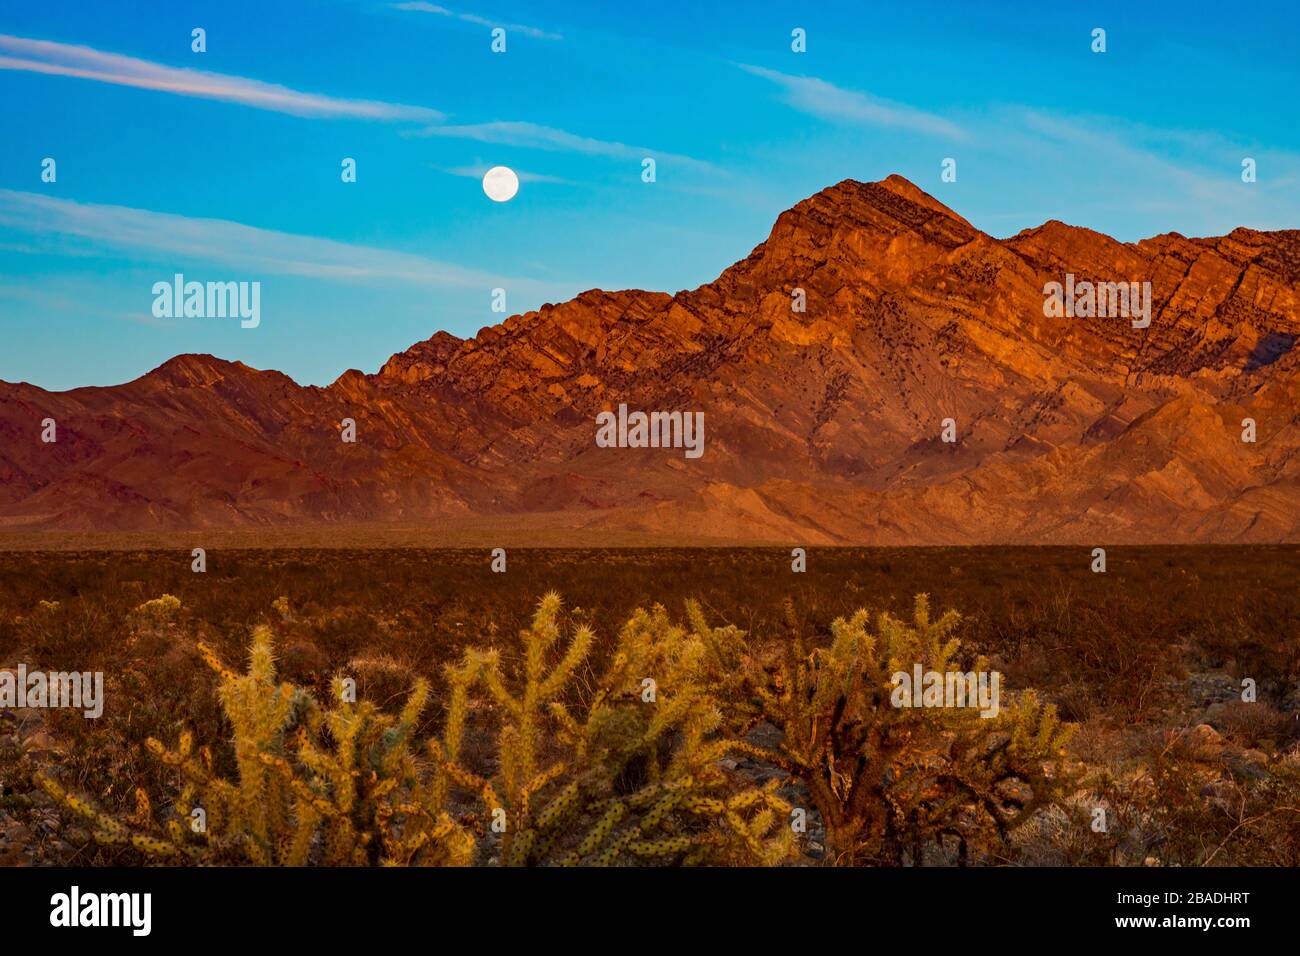 In this shot the full moon rises over a mountain range near the Kelbaker Road in the Mojave National Preserve, California, USA. Stock Photo